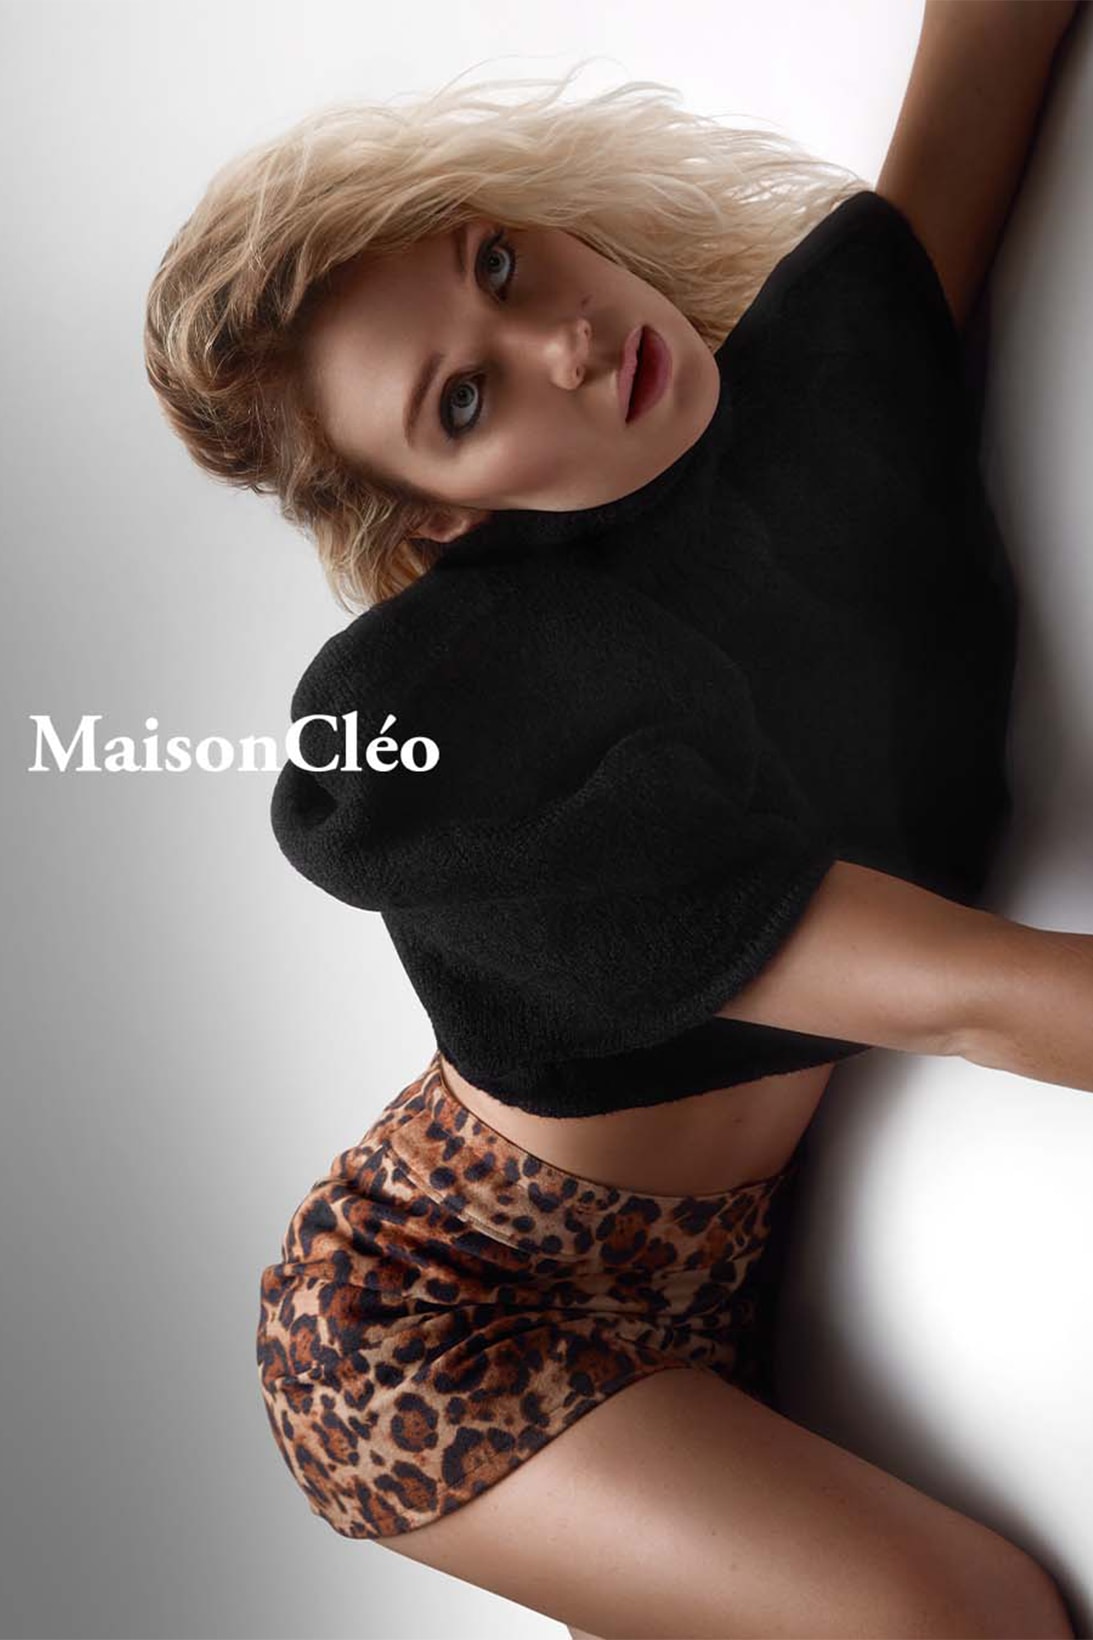 MaisonCleo Official Photos Affordable Outerwear Sustainability Marie Dewet Top Leopard Print Black